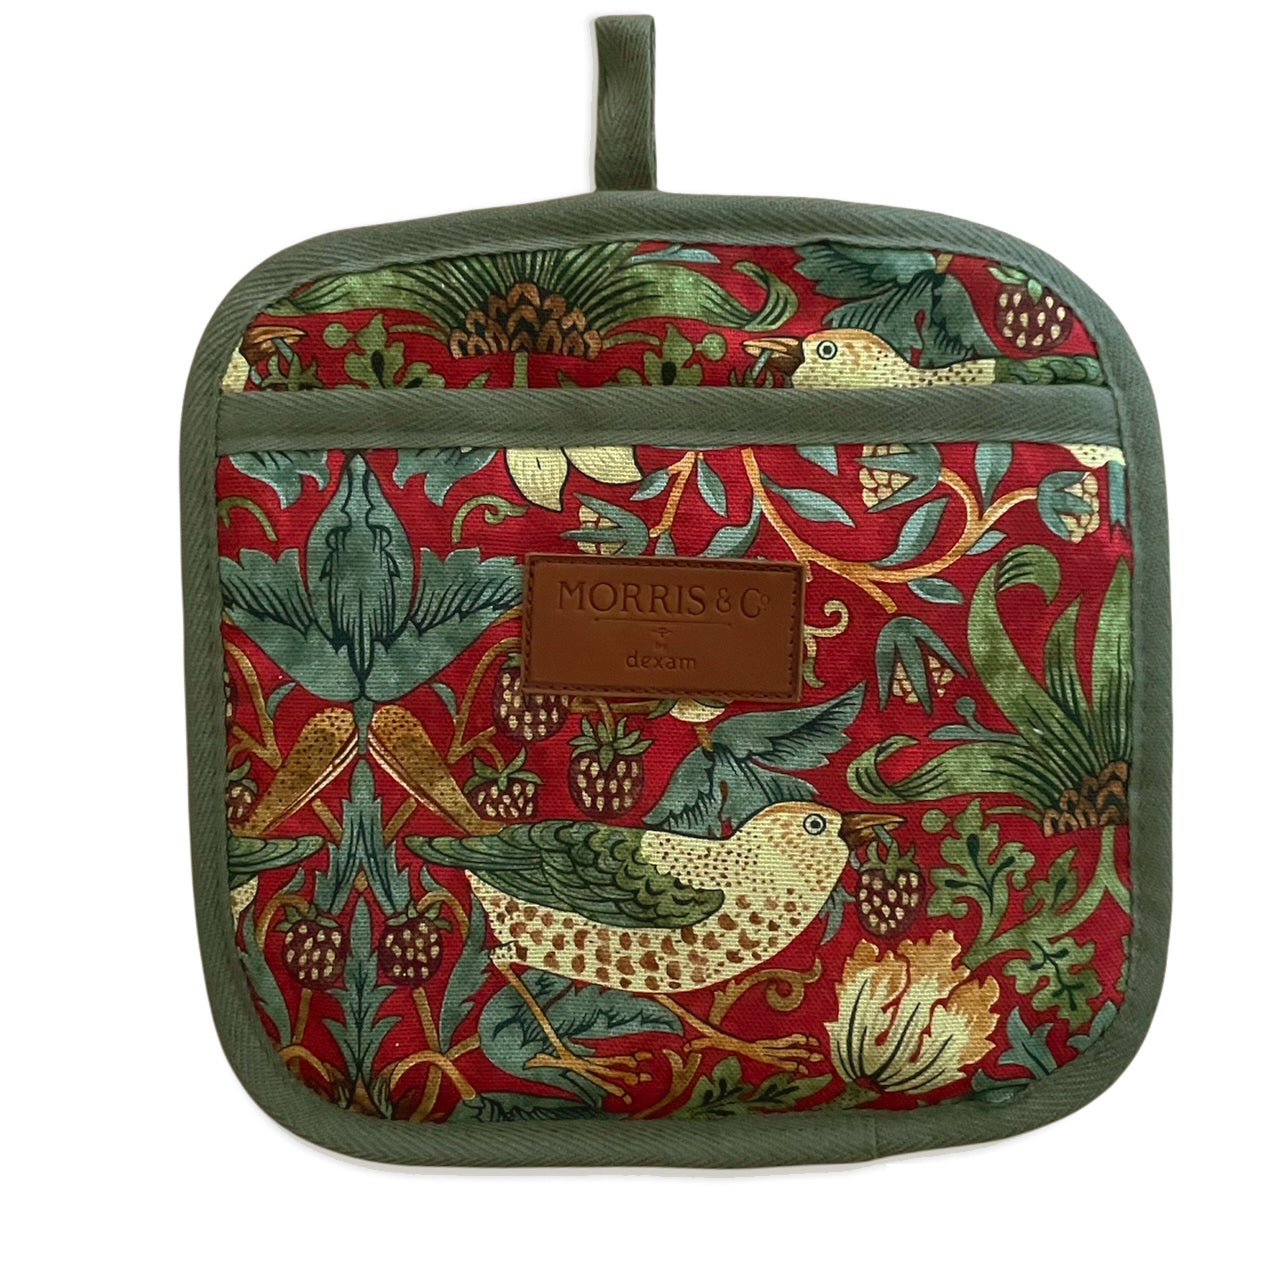 Pot Grab - William Morris & Co - Morris & Co Red Strawberry Thief Pot Grab with Pocket